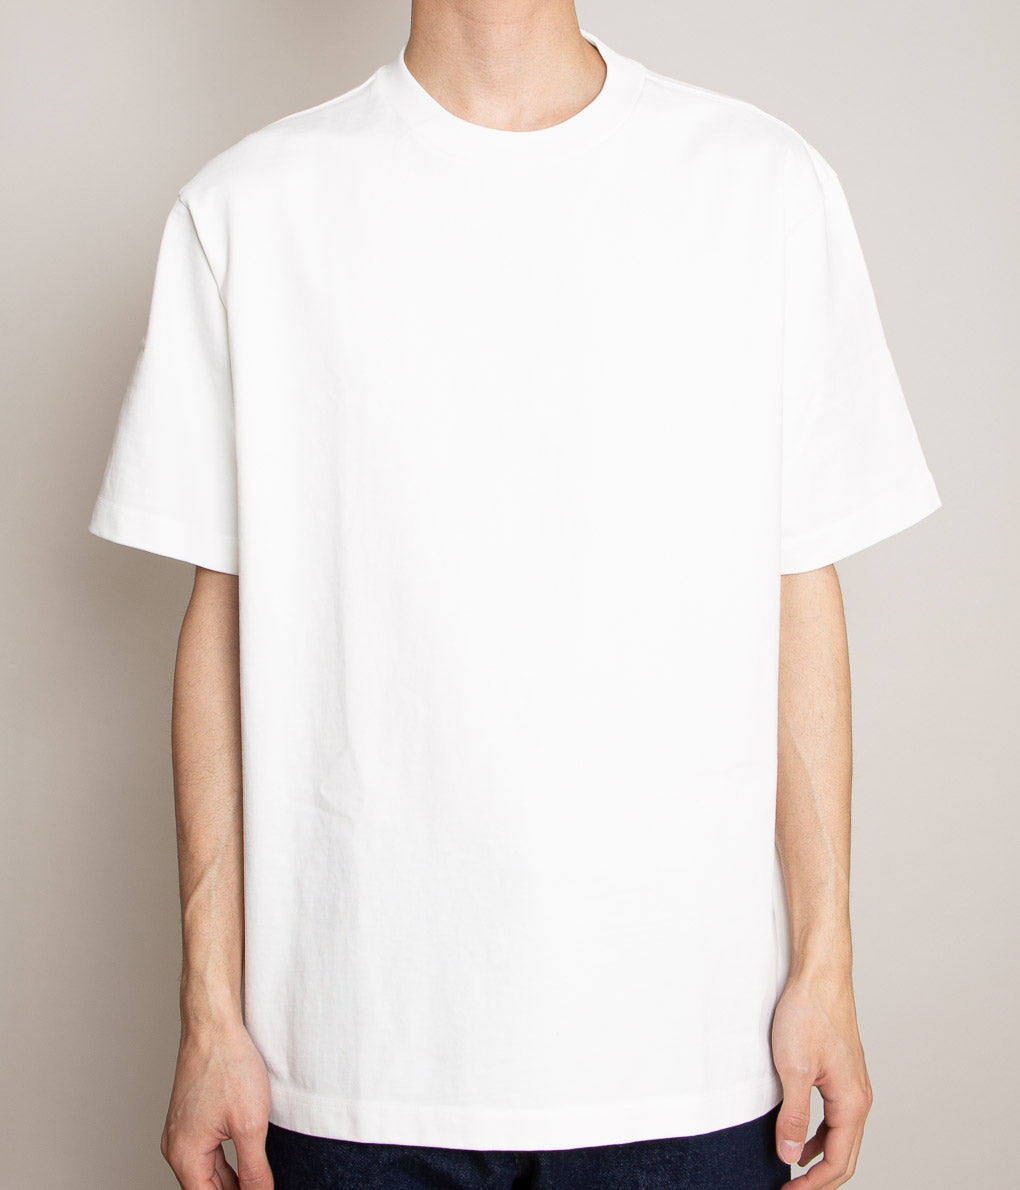 LADY WHITE CO. " RUGBY T-SHIRT"(WHITE)